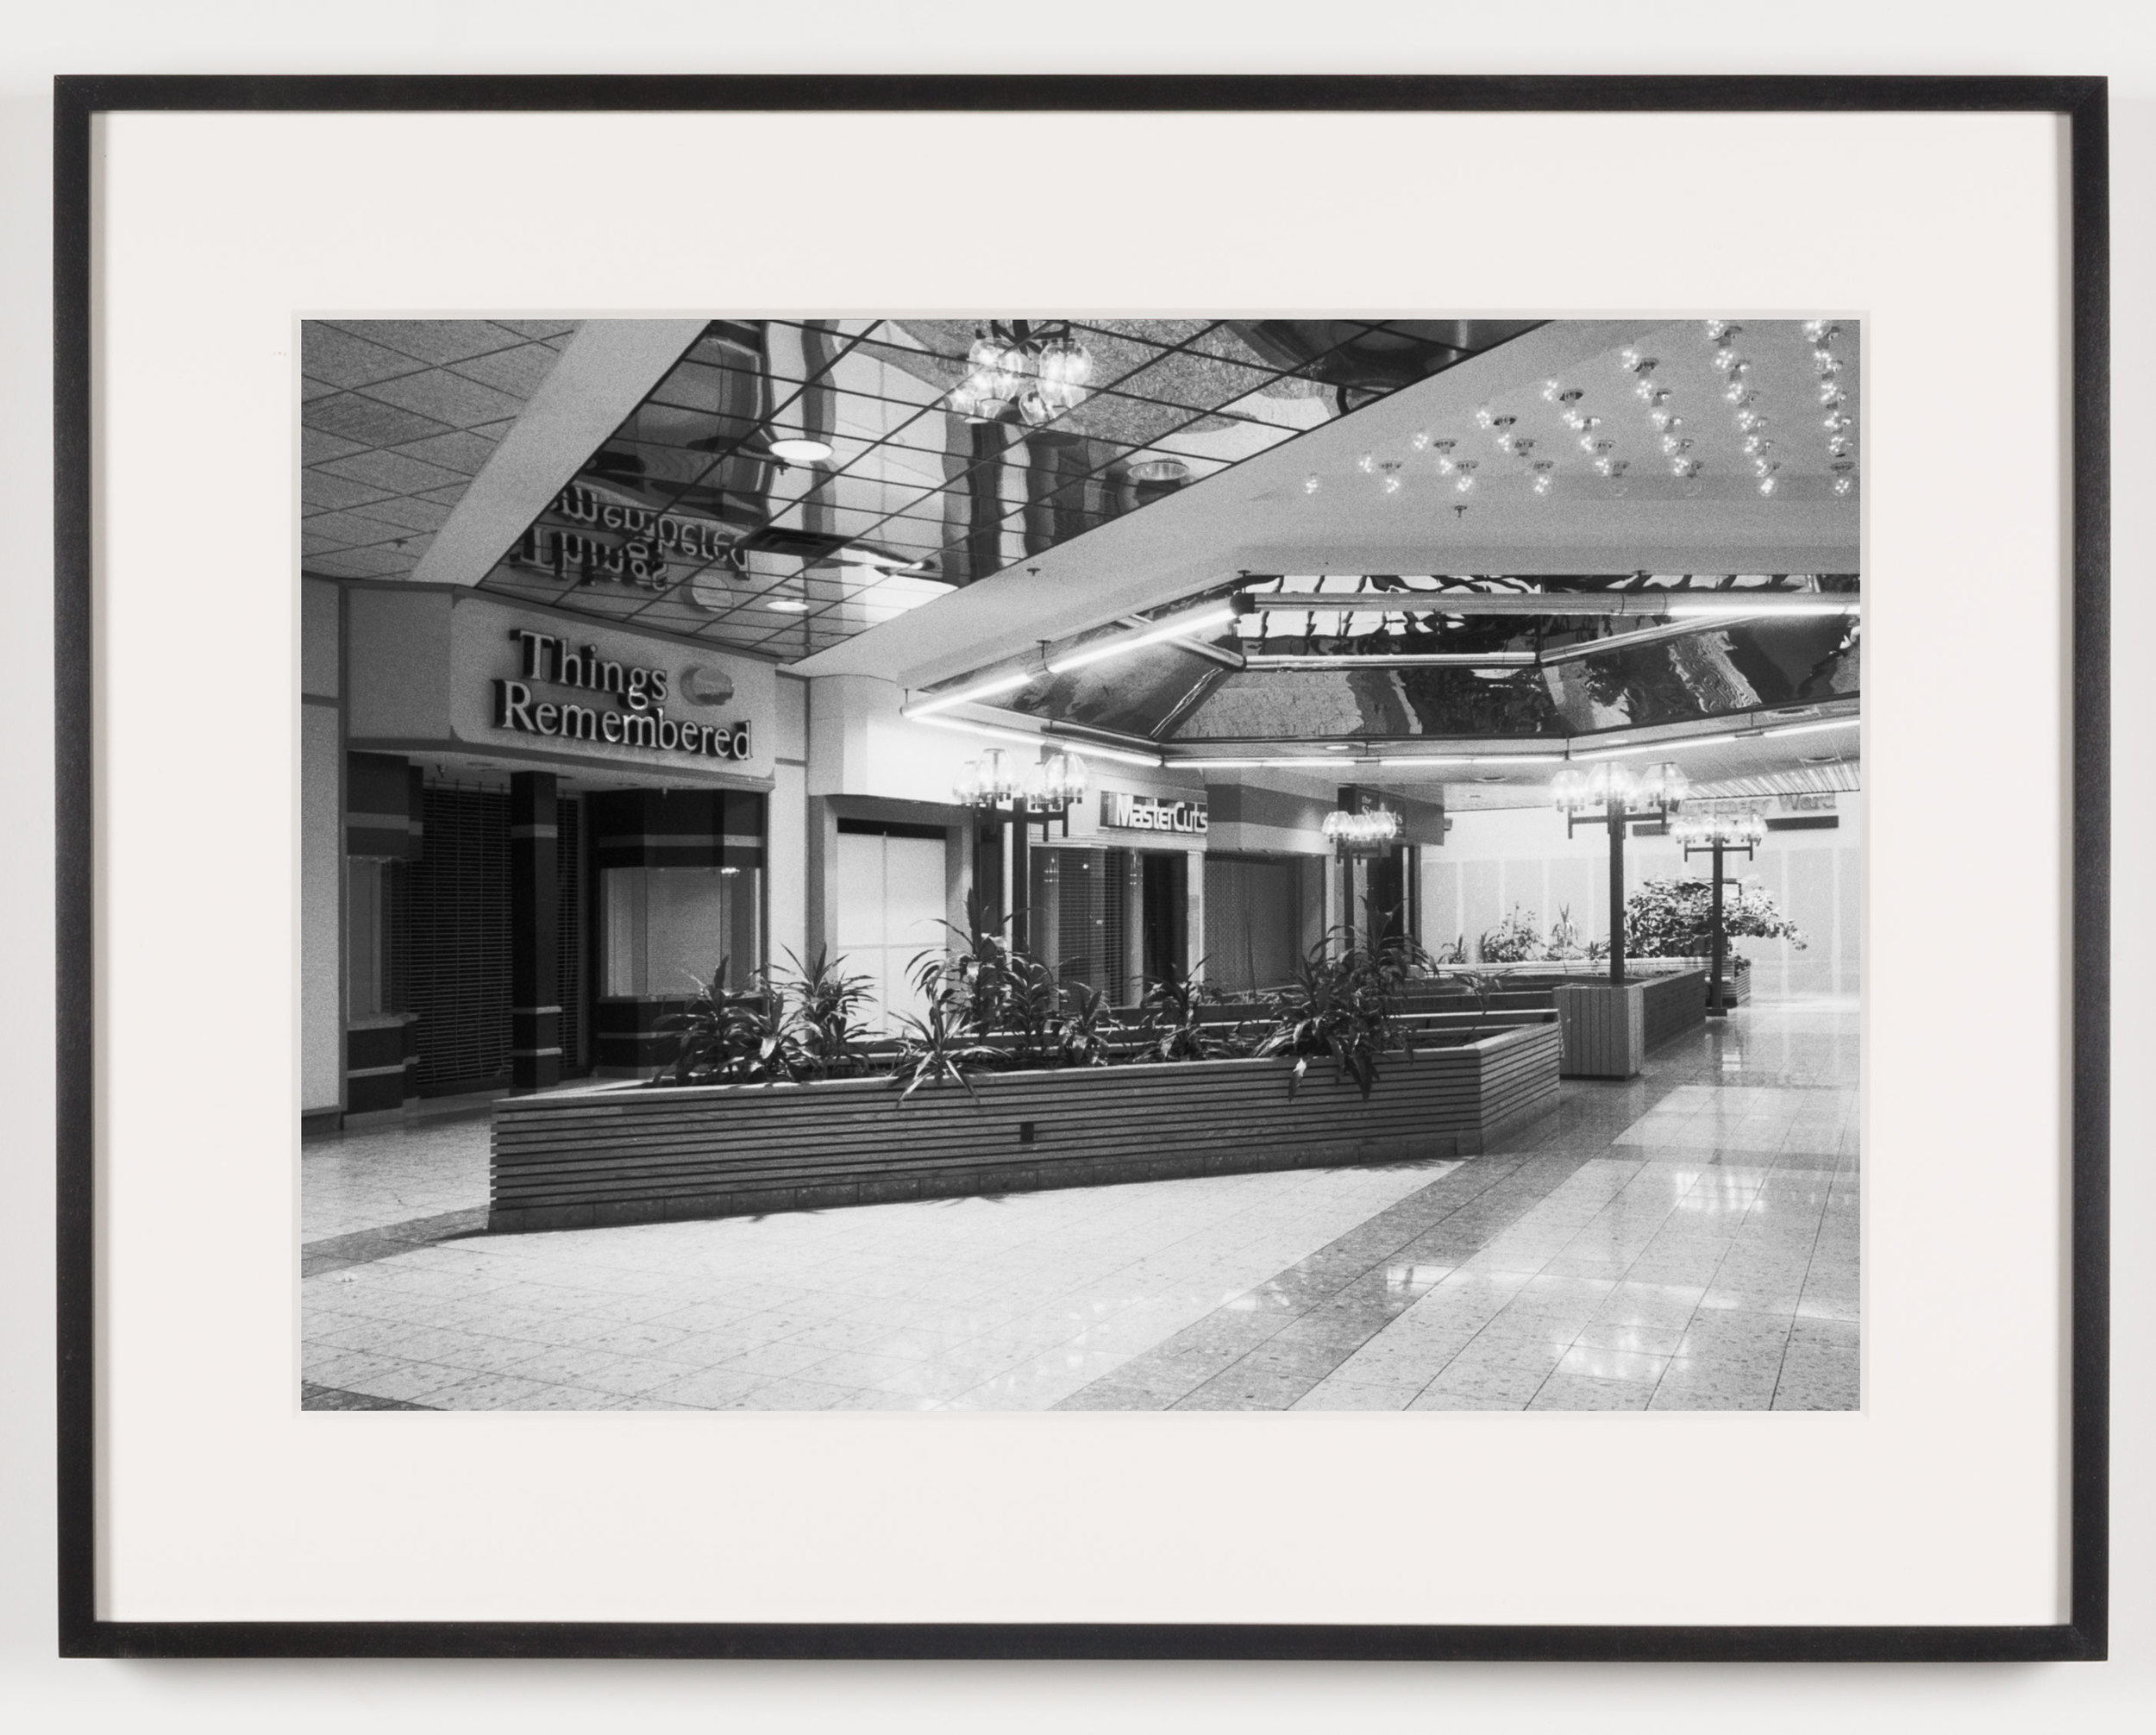   Southwyck Mall, Toledo, OH, Est 1972, Demo 2008    2011   Epson Ultrachrome K3 archival ink jet print on Hahnemühle Photo Rag paper  21 5/8 x 28 1/8 inches   American Passages, 2001–2011     